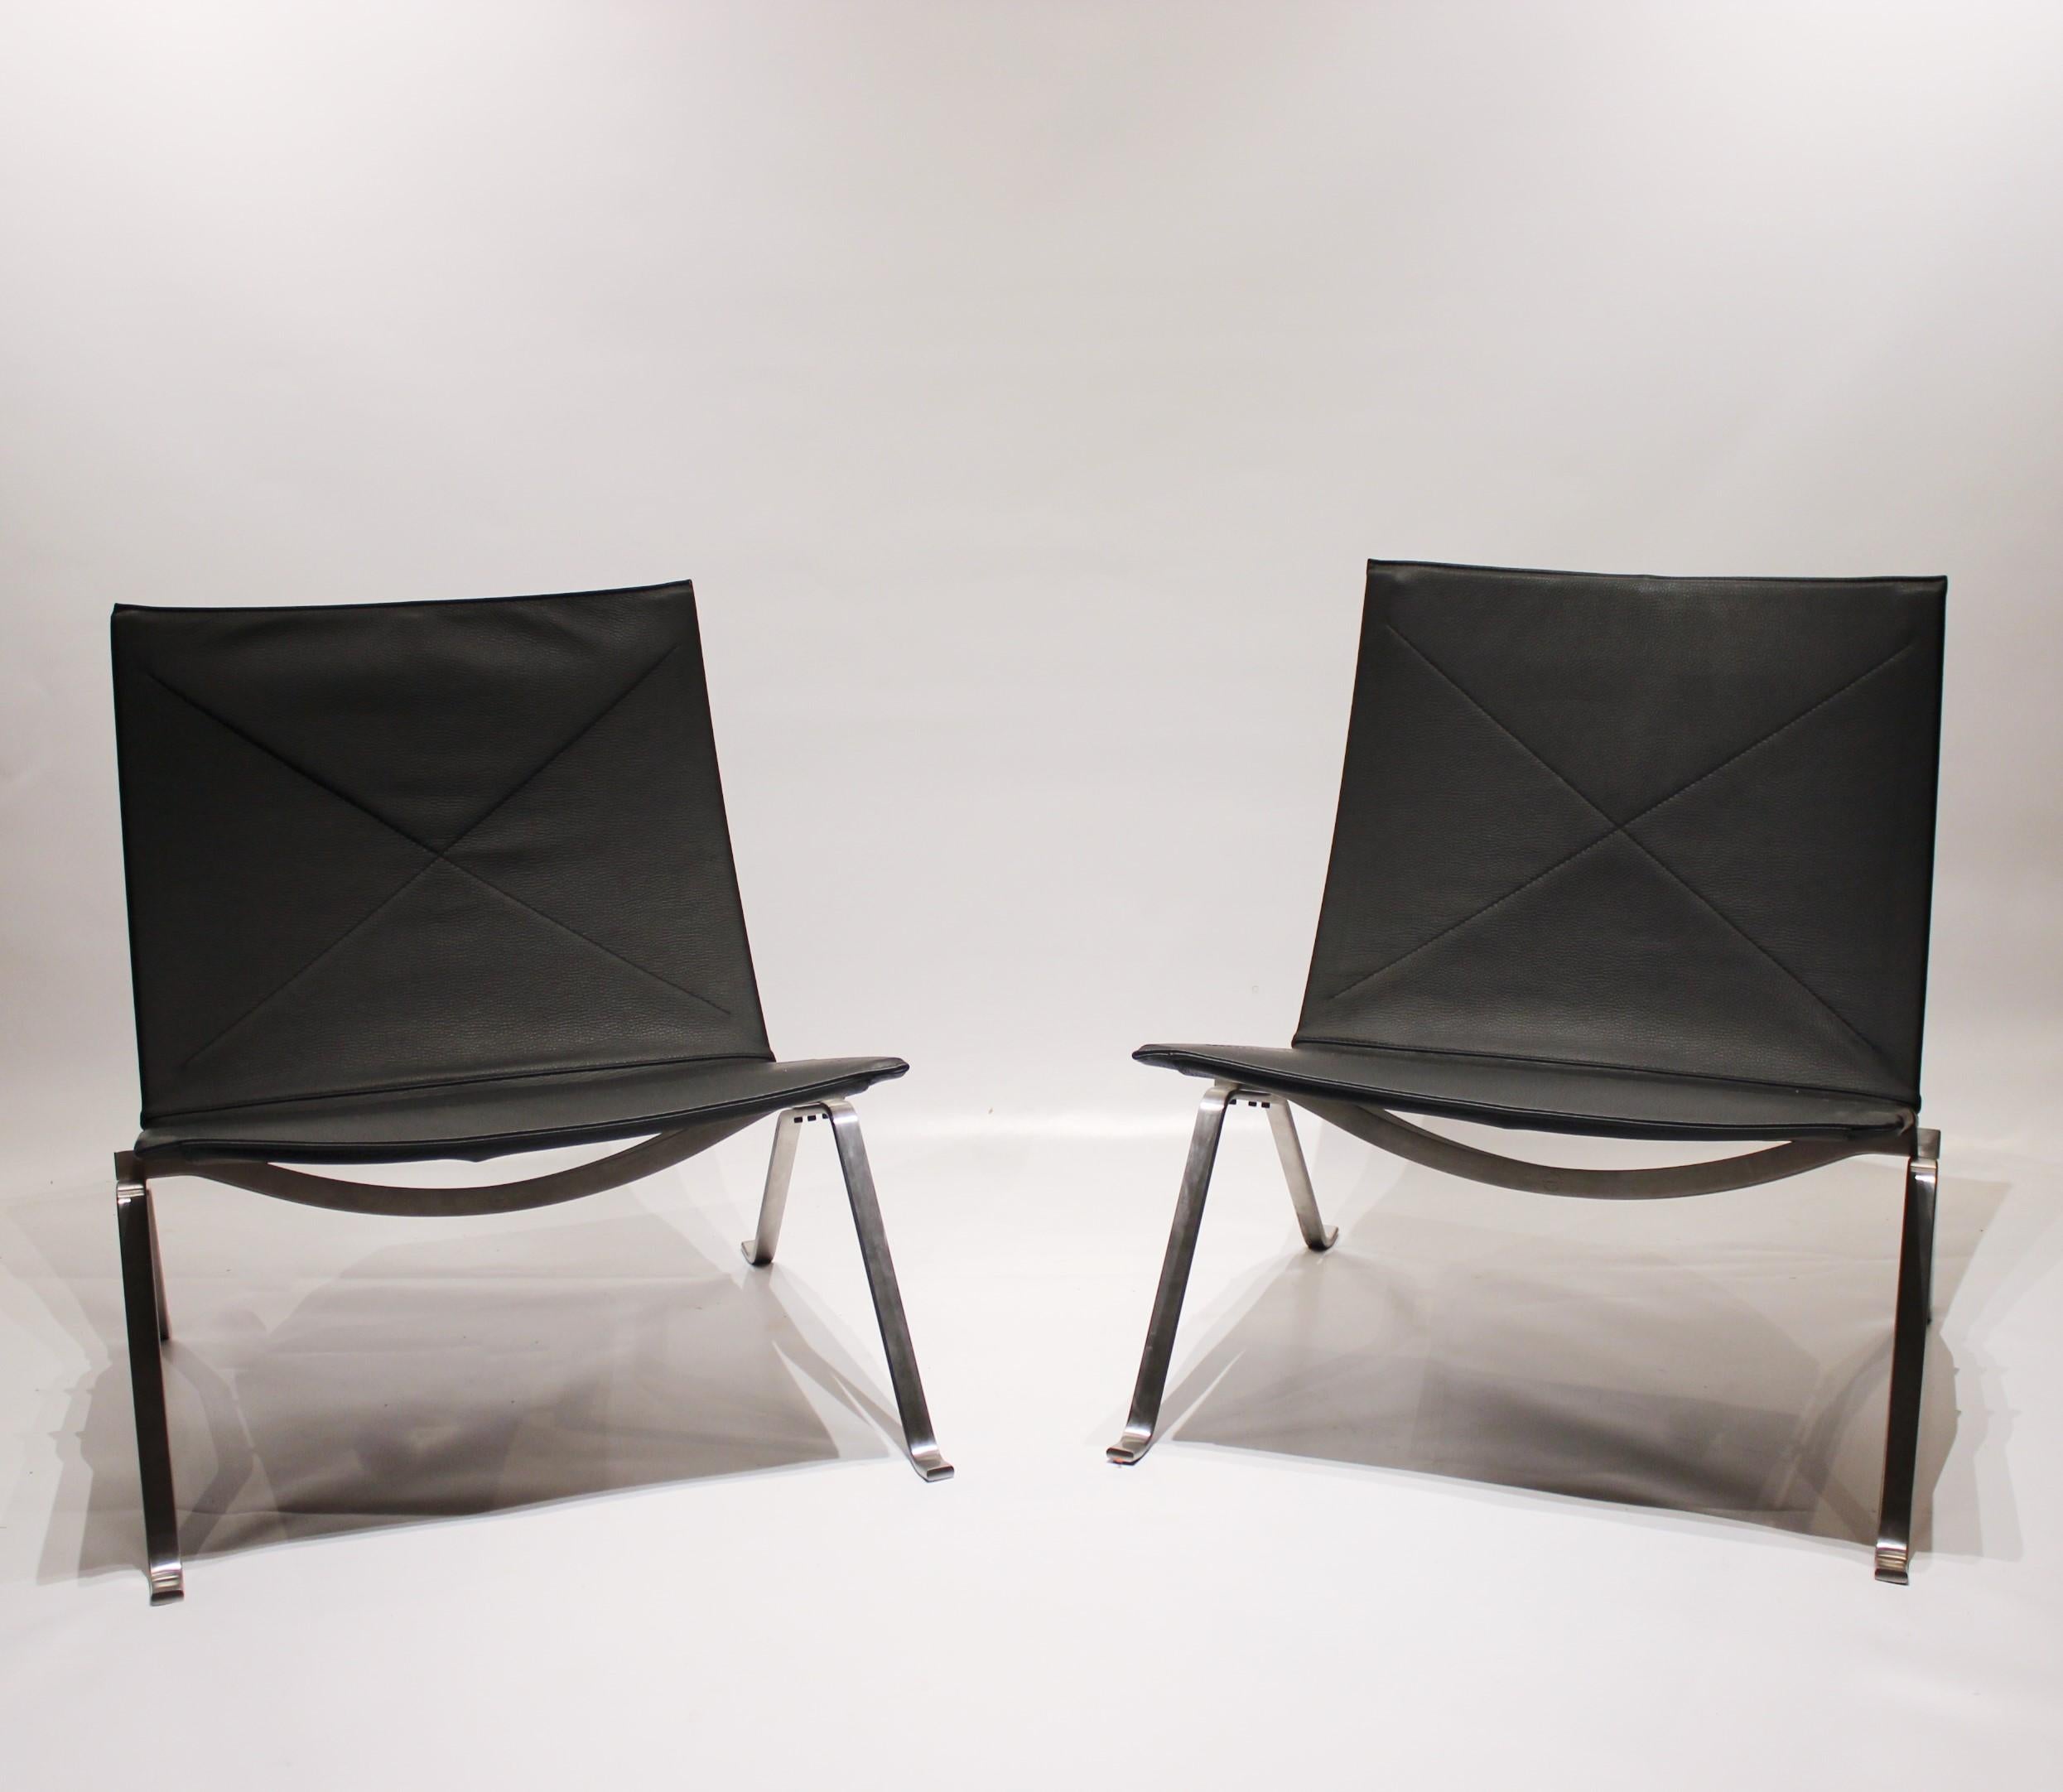 A pair of easy chairs, model PK22, designed by Poul Kjærholm in 1955 and manufactured by Fritz Hansen in the 1980s. The chairs are with original upholstery in black Classic leather and are in great vintage condition.